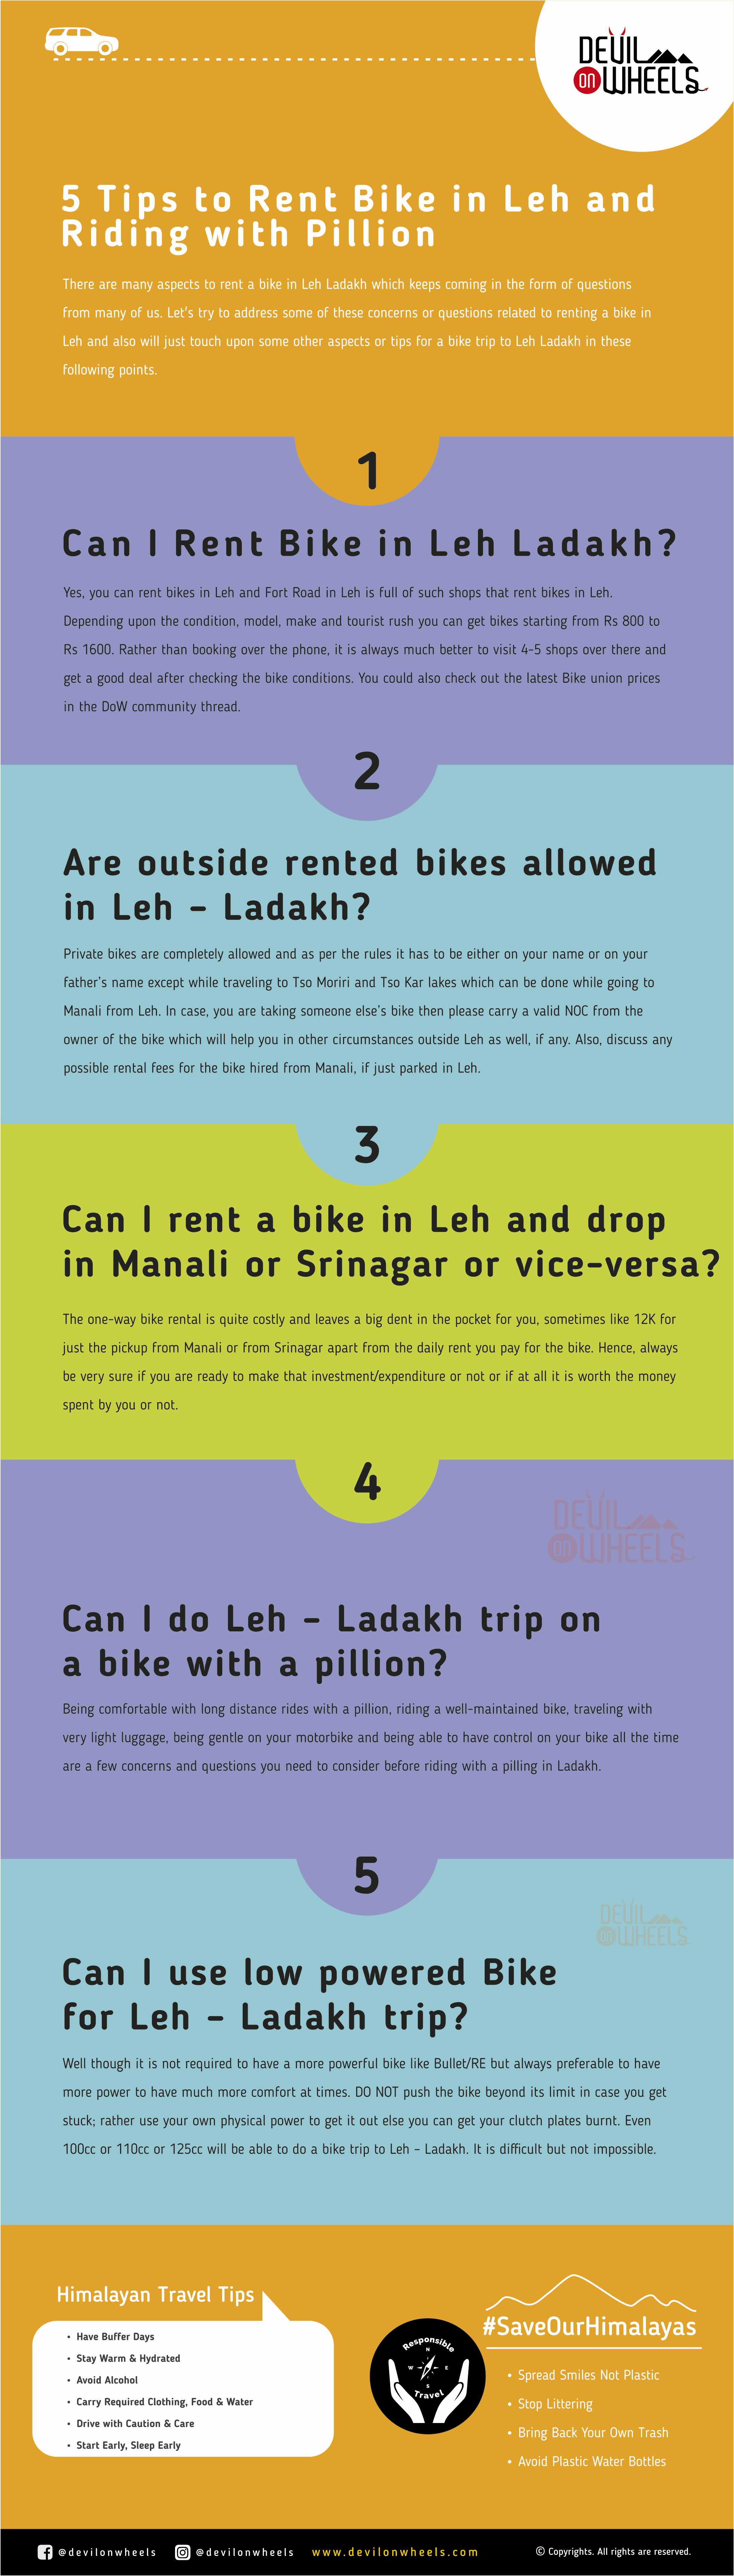 5 Important Tips to Rent Bike in Leh Ladakh and Ride with Pillion